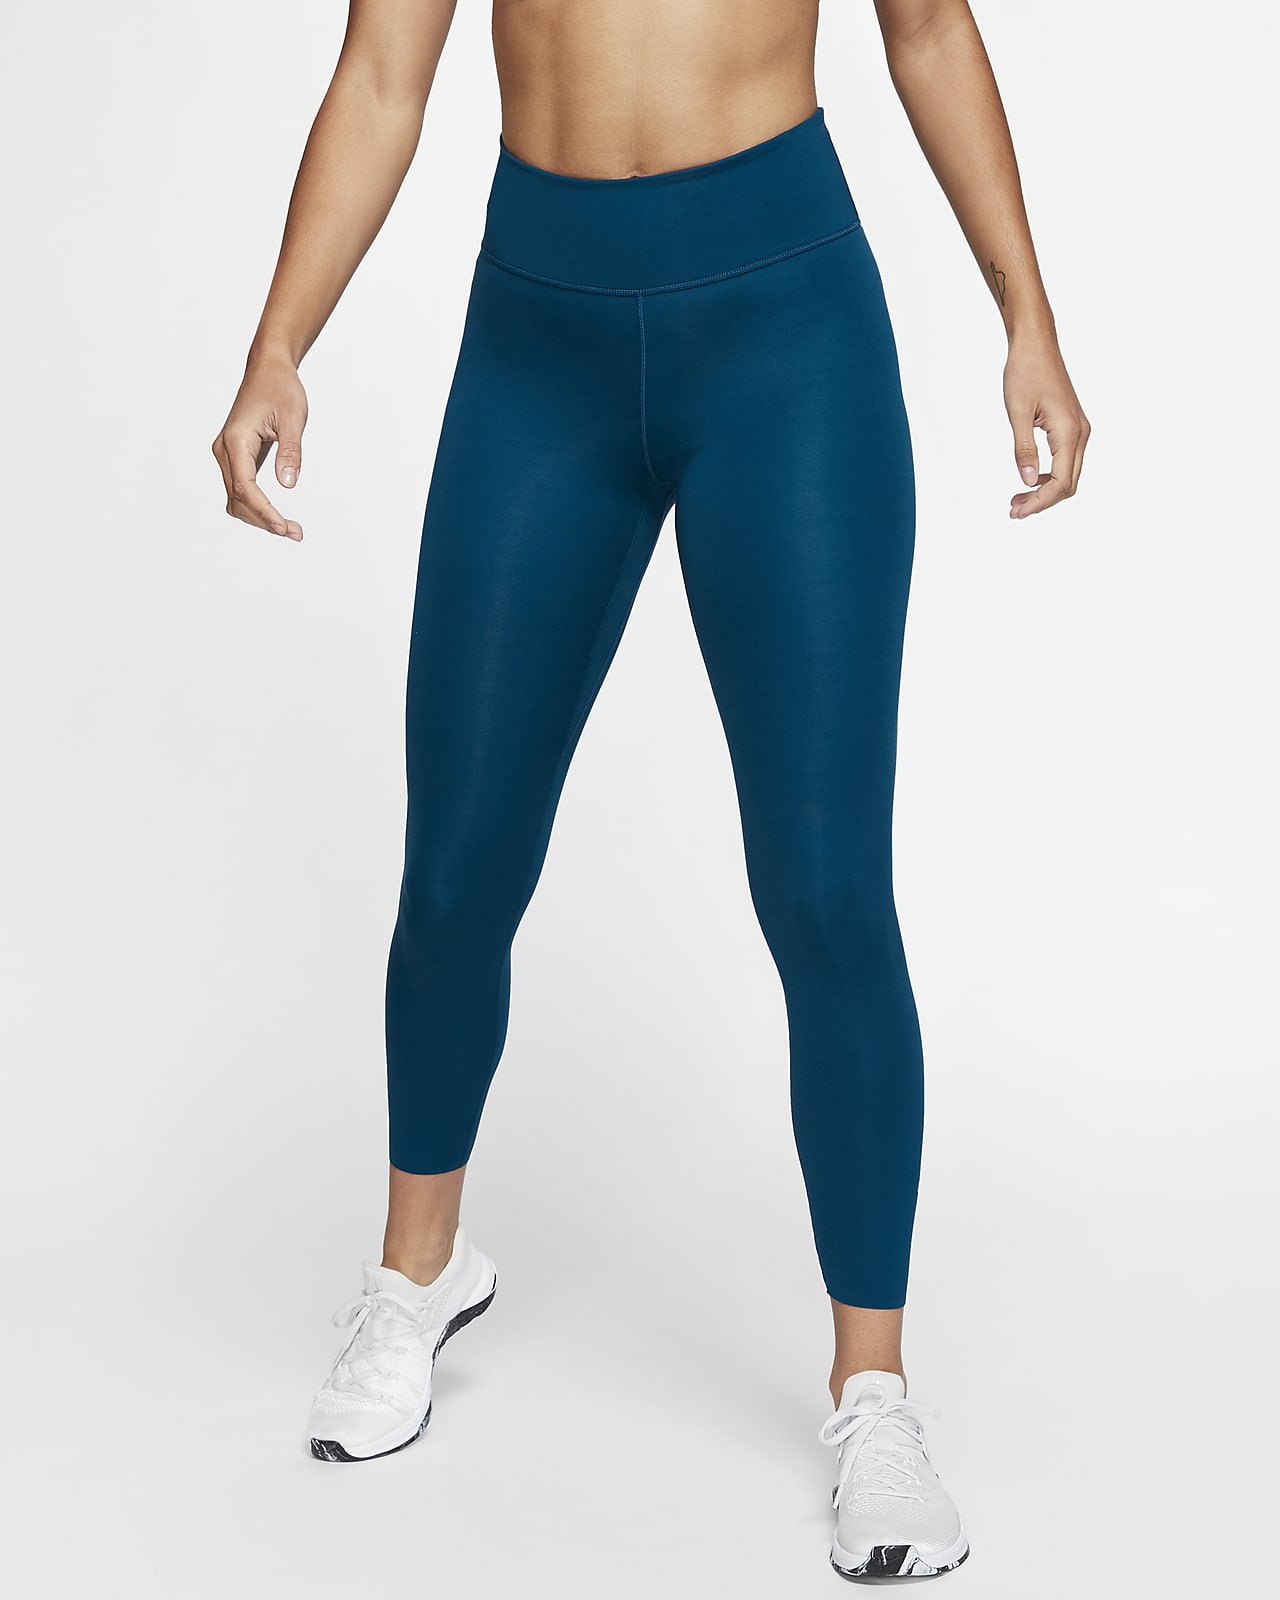 nike one luxe leggings review